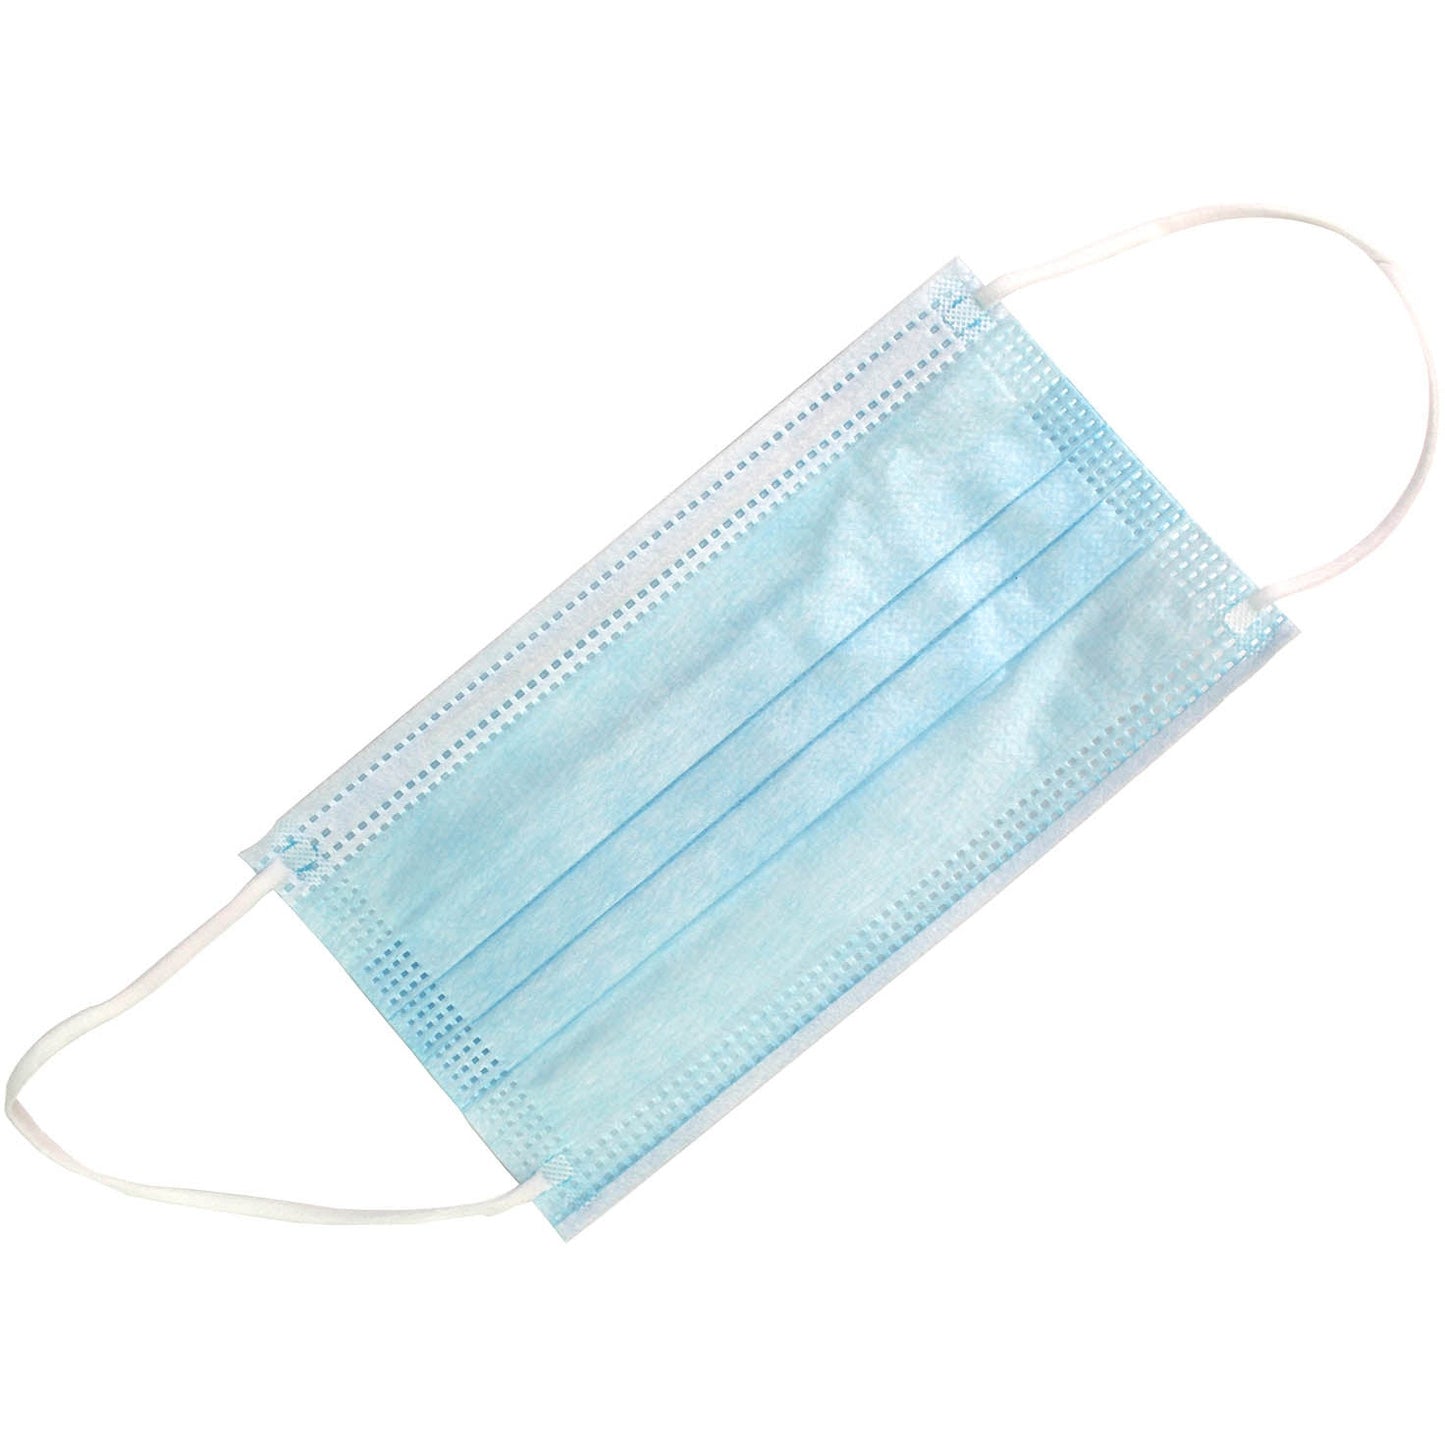 Type IIR Surgical Face Masks (Box of 50 Masks)